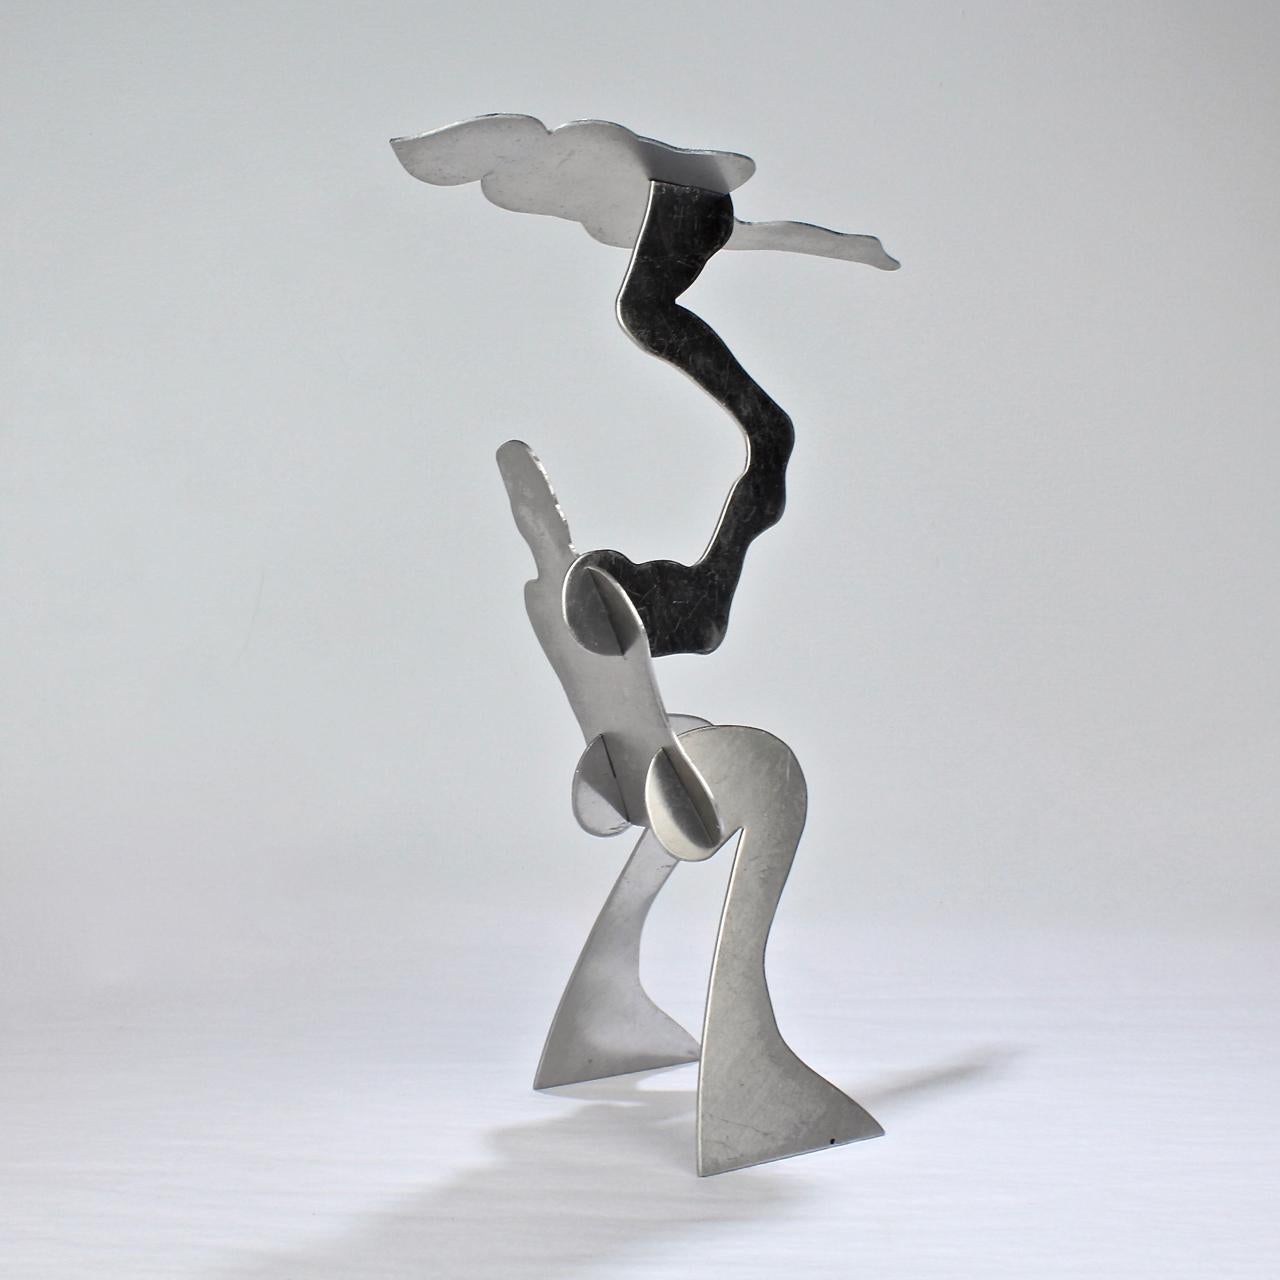 Event and The Test  - a group of 2 Mid-Century Modern aluminum acrobat sculptures.

William D. King (1925-2015)

These interlocking aluminum sculptures were part of a series, which was sold principally in museum gift shops in the 1960s-1970s during